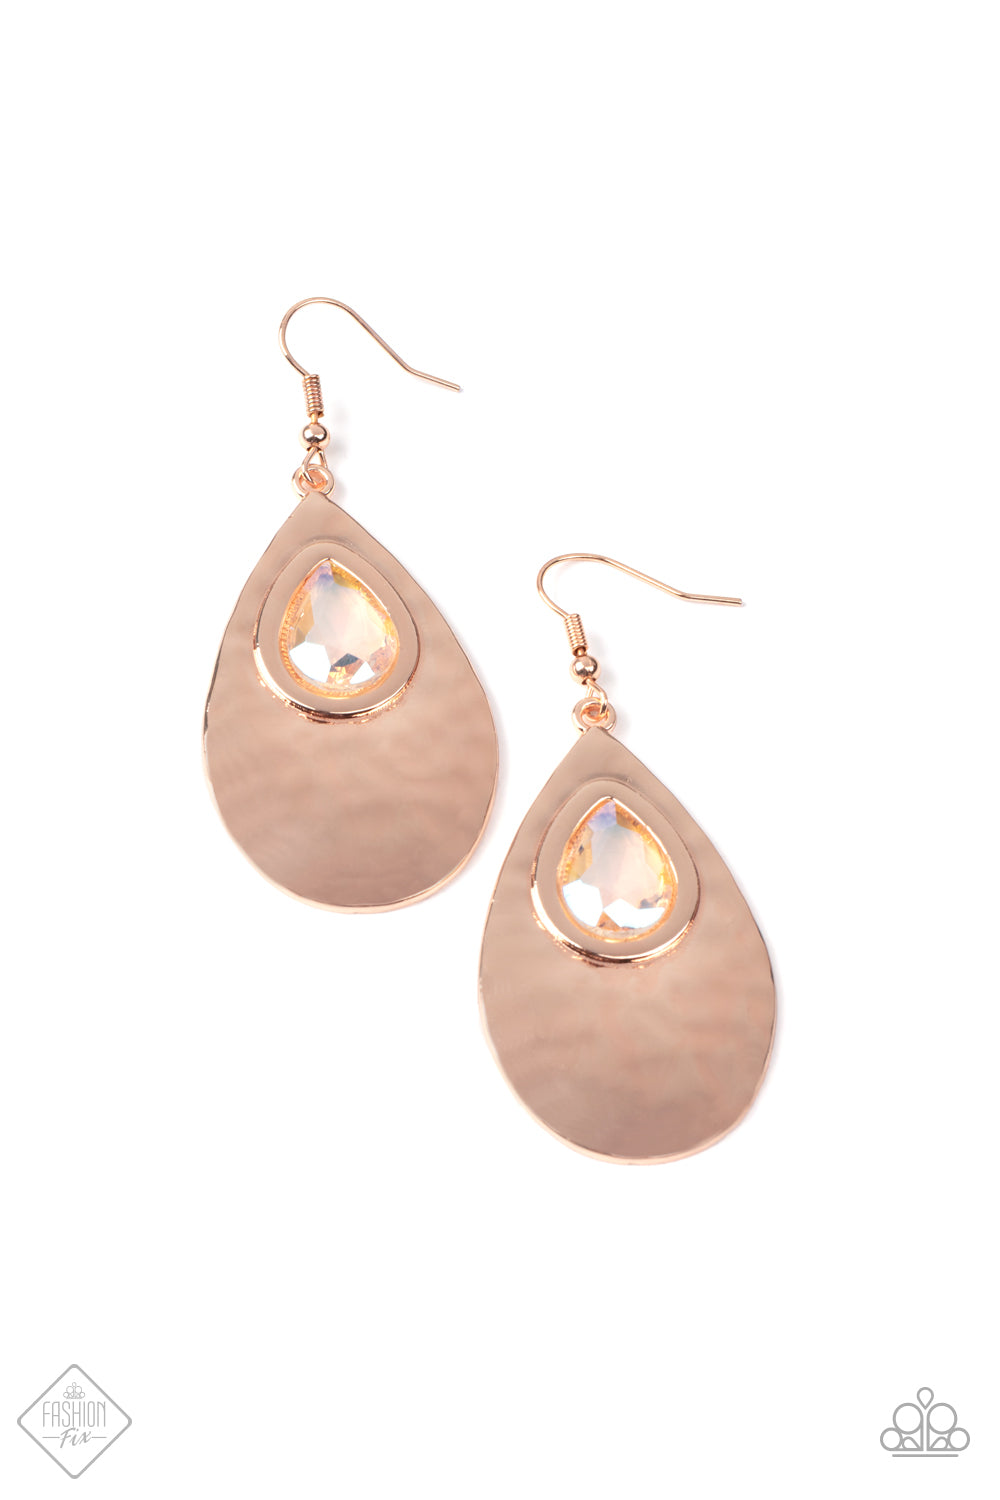 Paparazzi Tranquil Trove Fashion Fix - Rose Gold Earrings - A Finishing Touch Jewelry